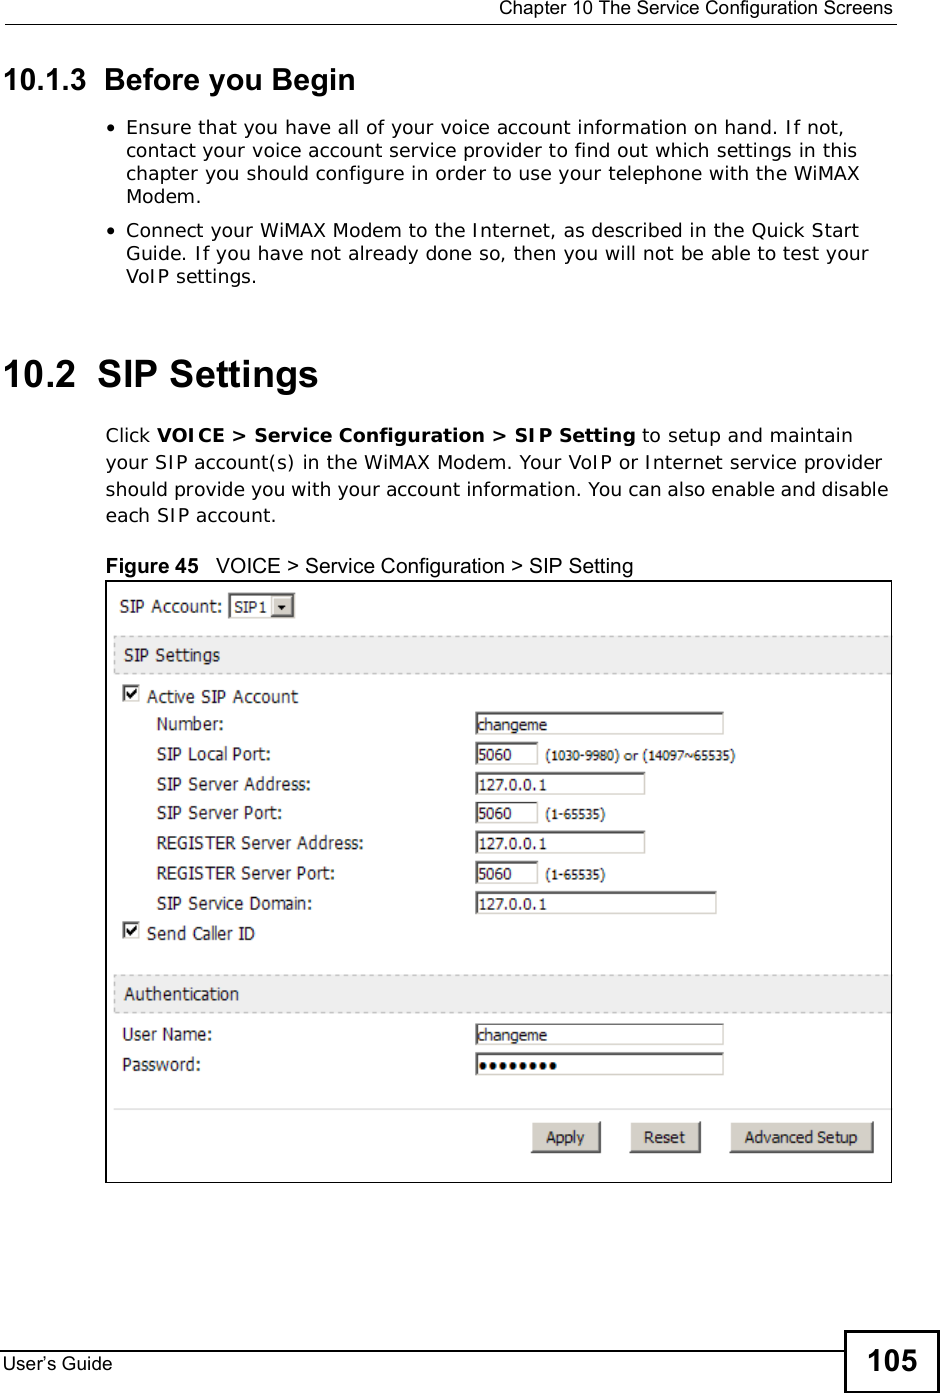  Chapter 10The Service Configuration ScreensUser s Guide 10510.1.3  Before you Begin•Ensure that you have all of your voice account information on hand. If not, contact your voice account service provider to find out which settings in this chapter you should configure in order to use your telephone with the WiMAX Modem.•Connect your WiMAX Modem to the Internet, as described in the Quick Start Guide. If you have not already done so, then you will not be able to test your VoIP settings.10.2  SIP SettingsClick VOICE &gt; Service Configuration &gt; SIP Setting to setup and maintain your SIP account(s) in the WiMAX Modem. Your VoIP or Internet service provider should provide you with your account information. You can also enable and disable each SIP account.Figure 45   VOICE &gt; Service Configuration &gt; SIP Setting